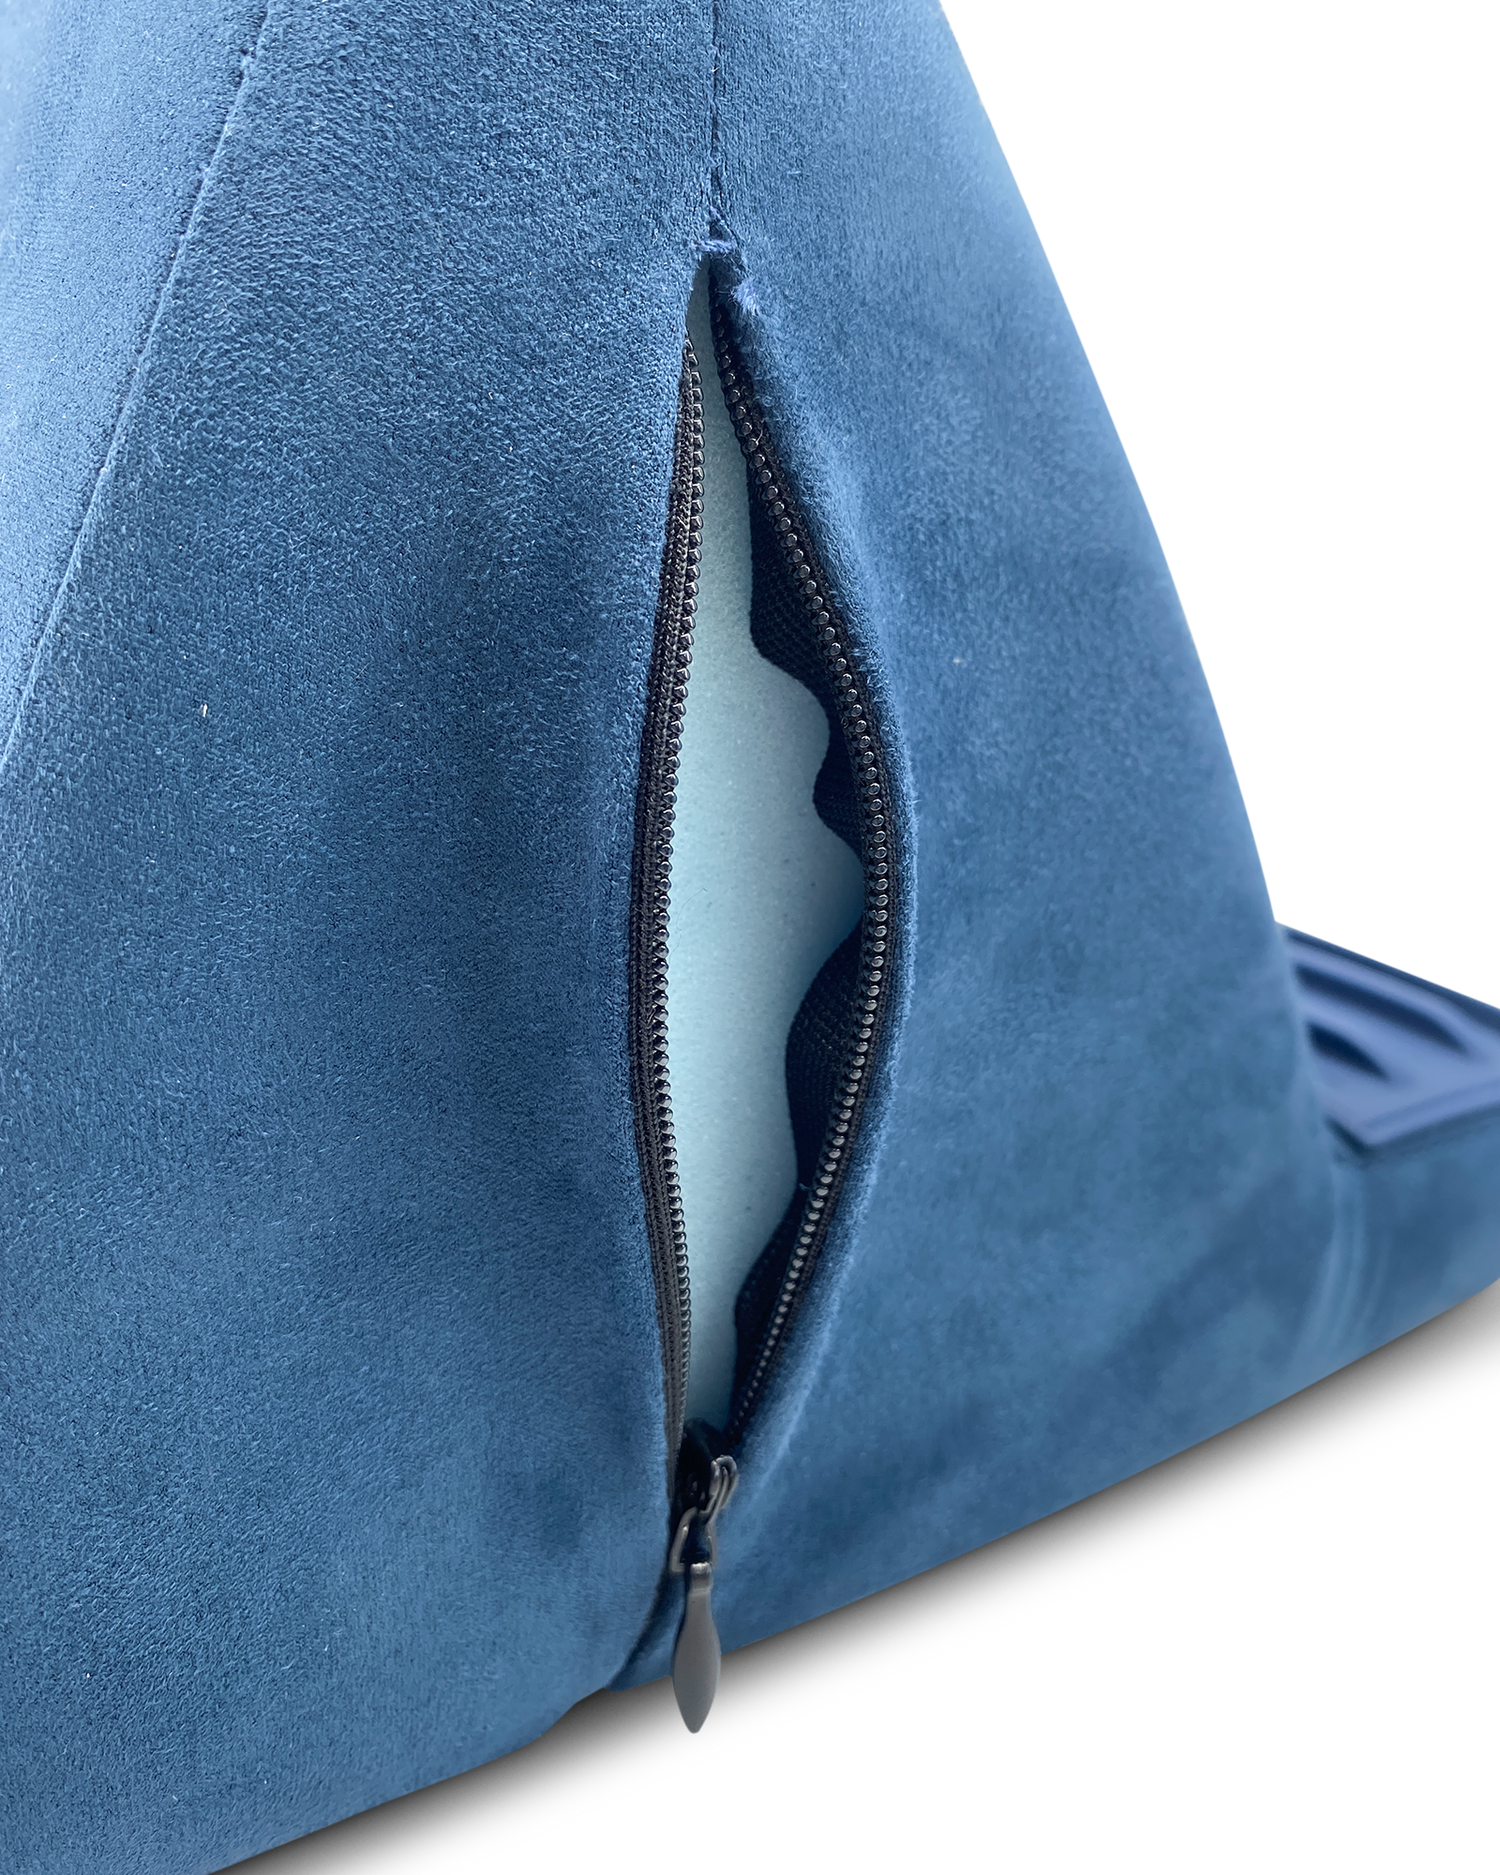 Pillow Stand for Tablets: Zipper